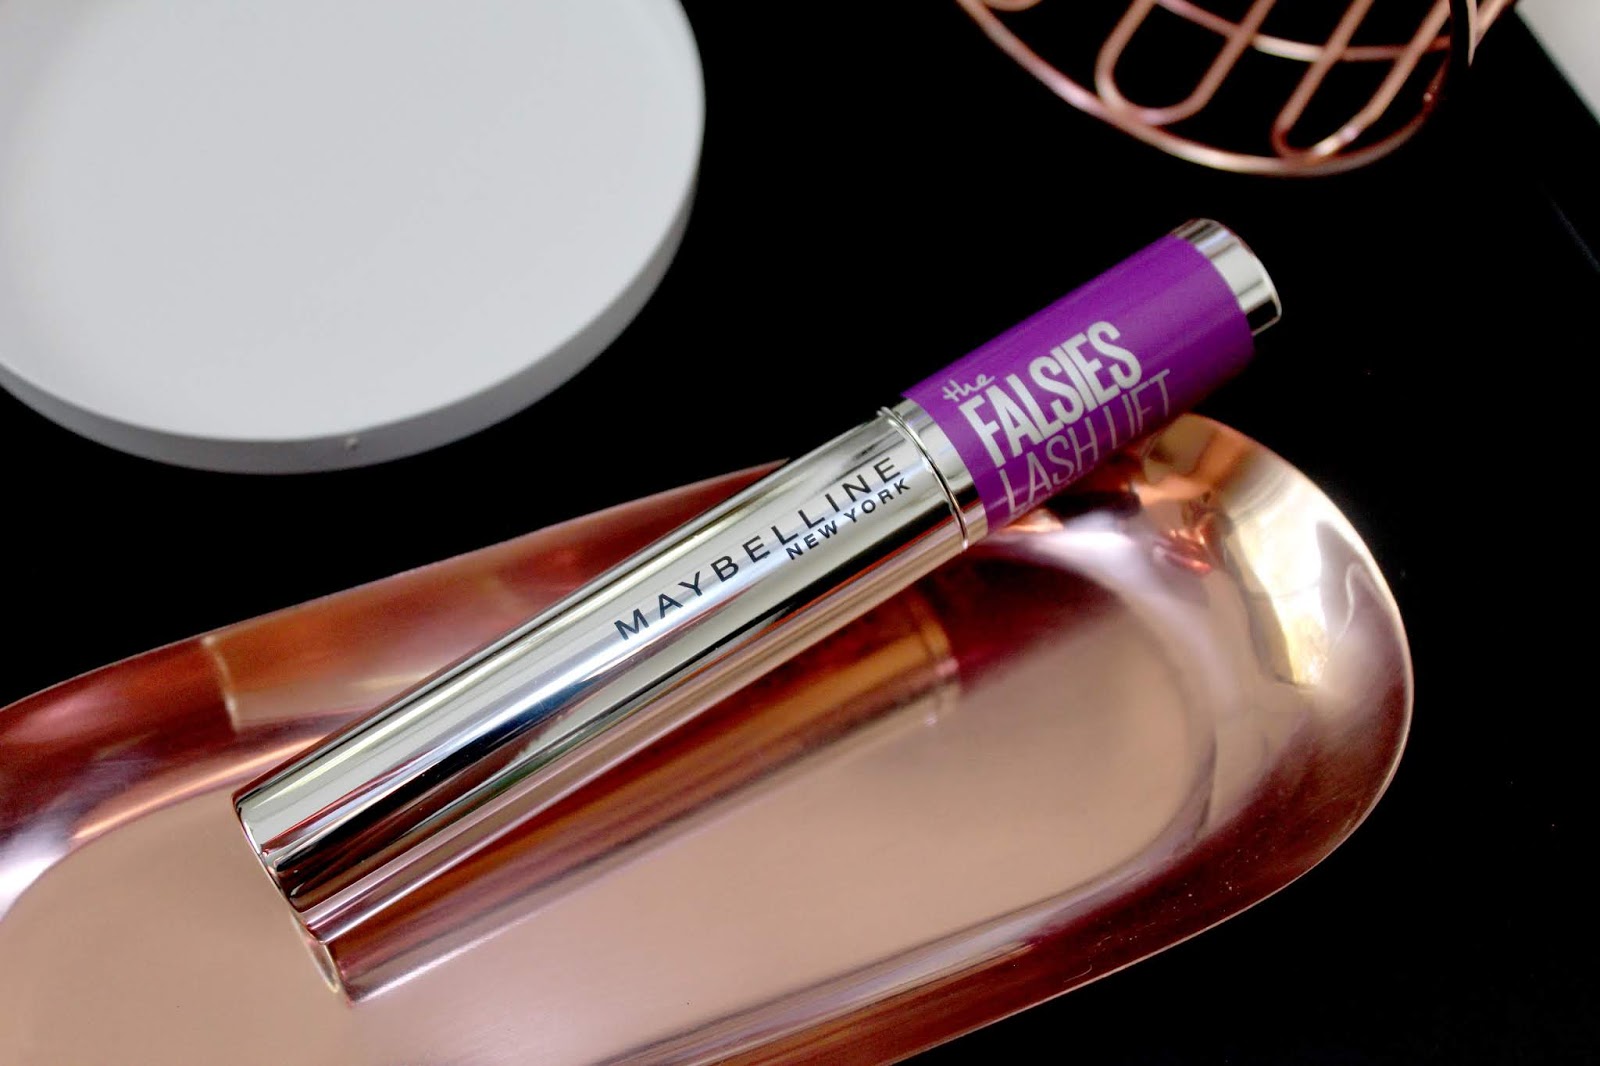 Maybelline Lift Review: Lash Falsies The